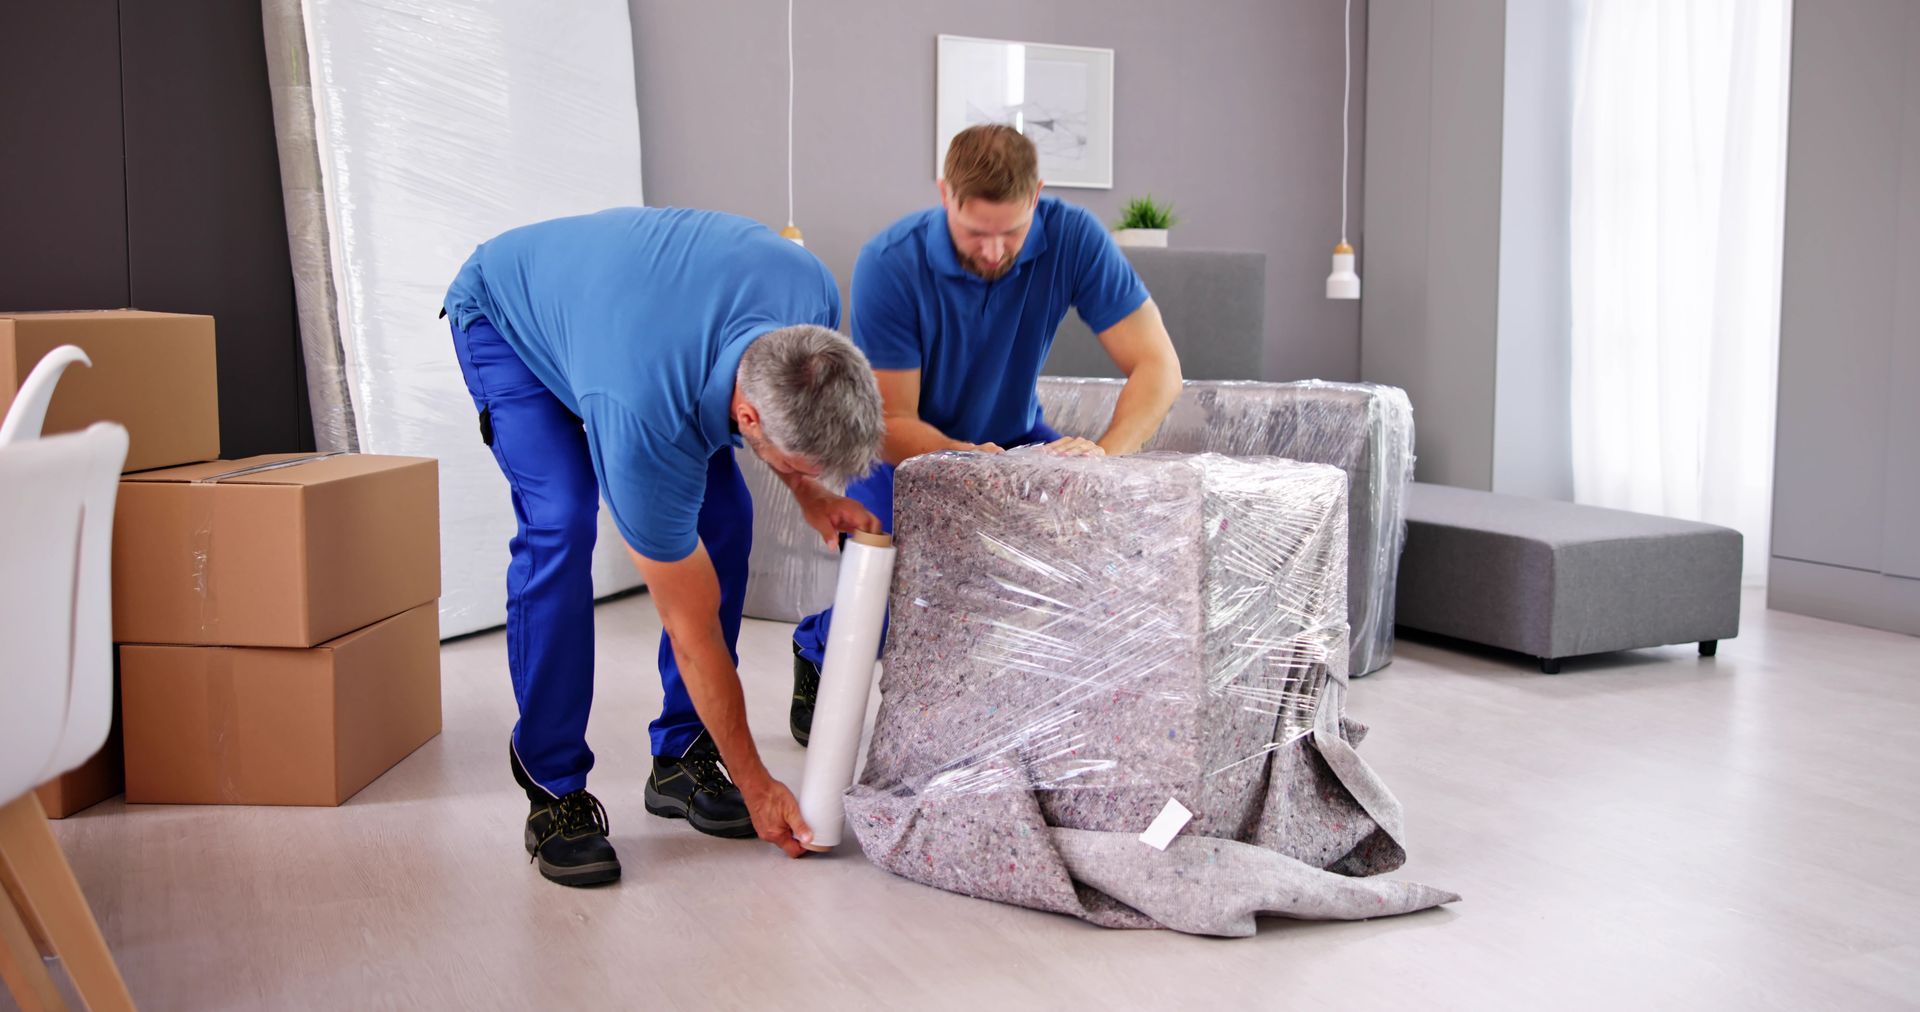 two men are wrapping a couch in plastic wrap in a living room .